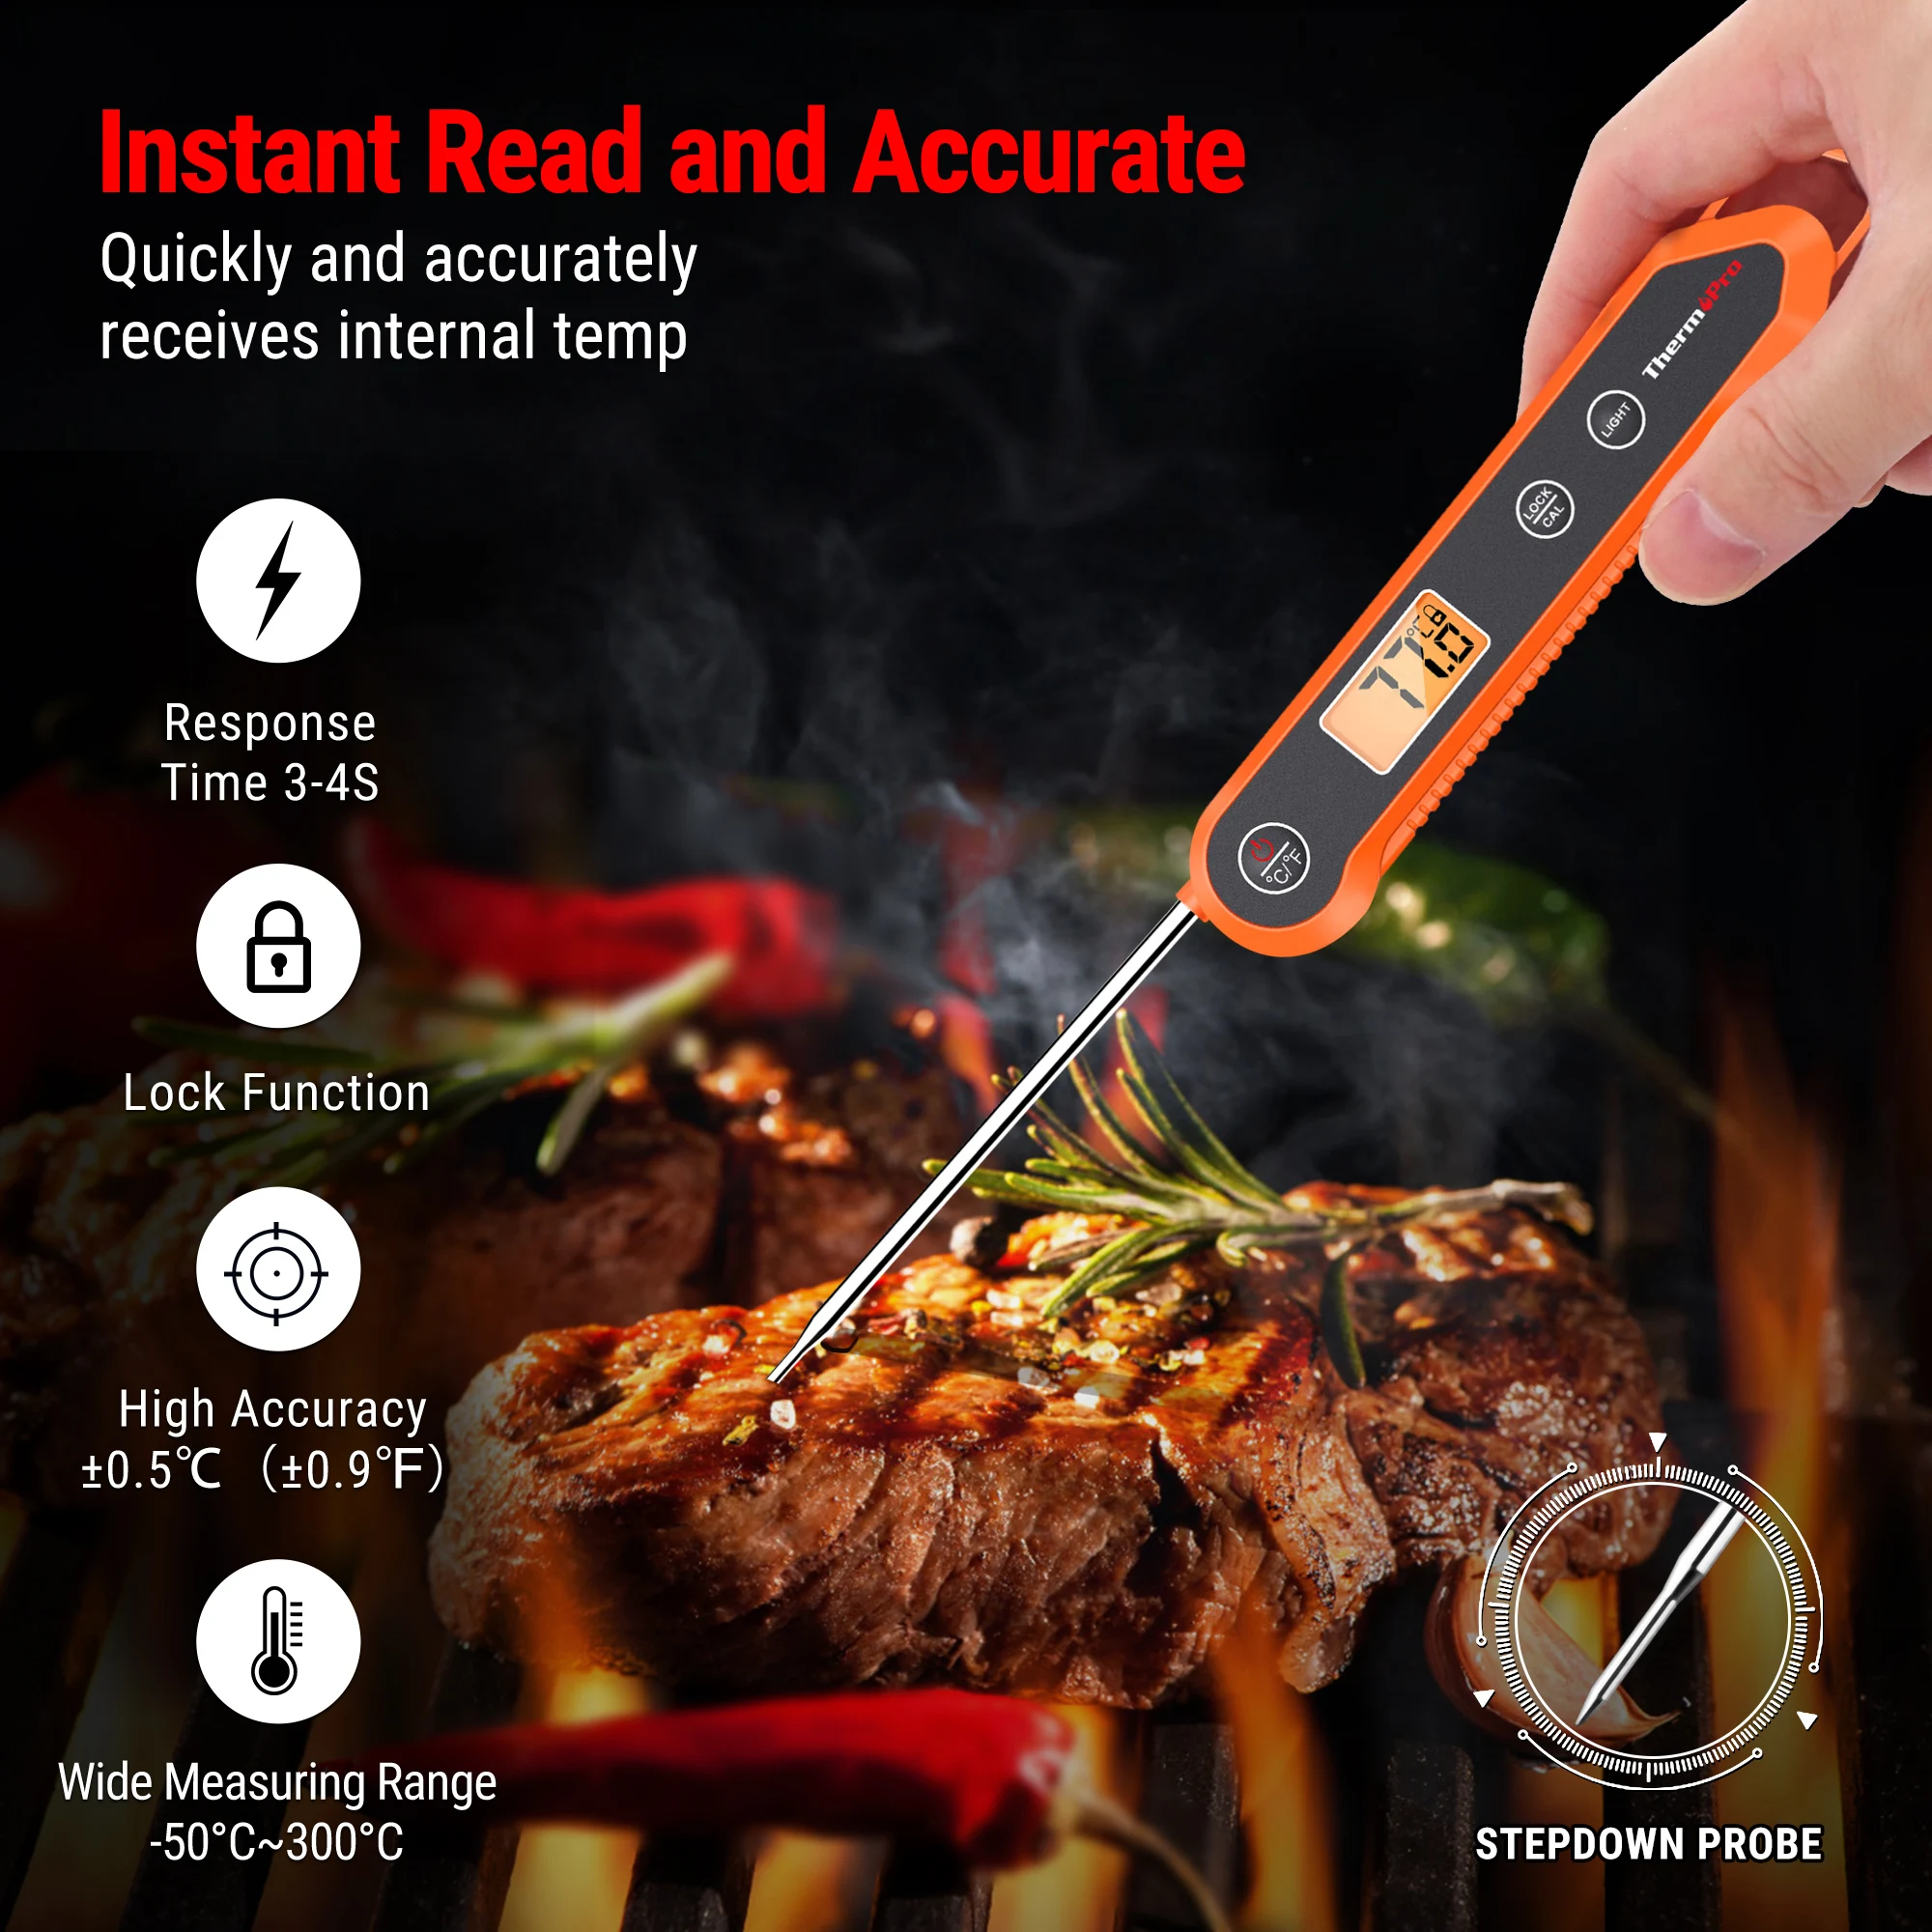 https://ae01.alicdn.com/kf/S1eaabf238e694287b38e2d28a6b1b63ff/ThermoPro-TP03H-Backlight-Digital-BBQ-Kithchen-Meat-Thermometer-Waterproof-Fast-Reading-Folding-Cooking-Thermometer.jpg